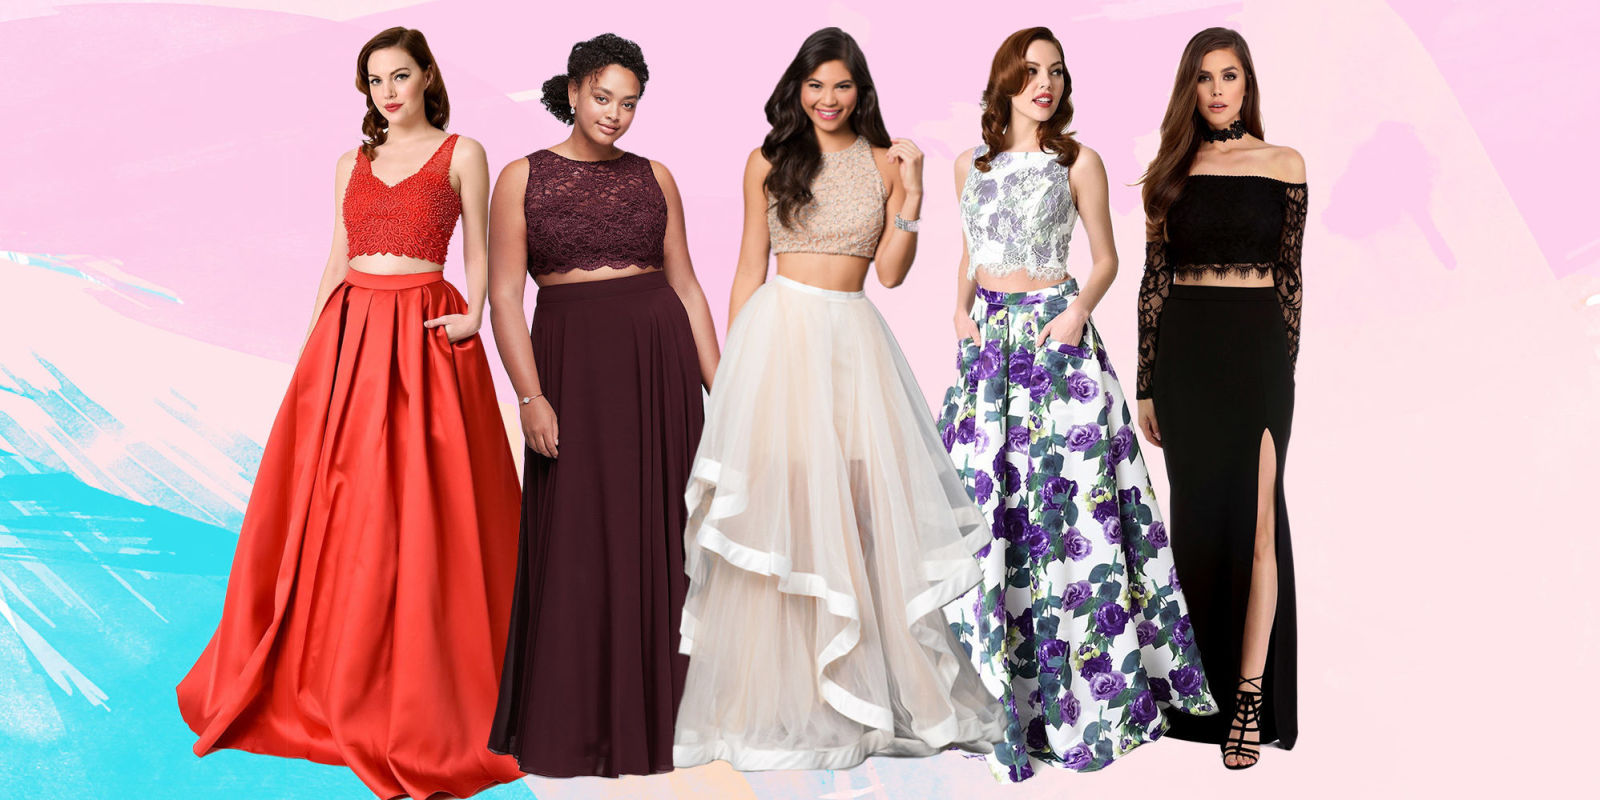 How to Look Absolutely Stunning In Your Prom Dress